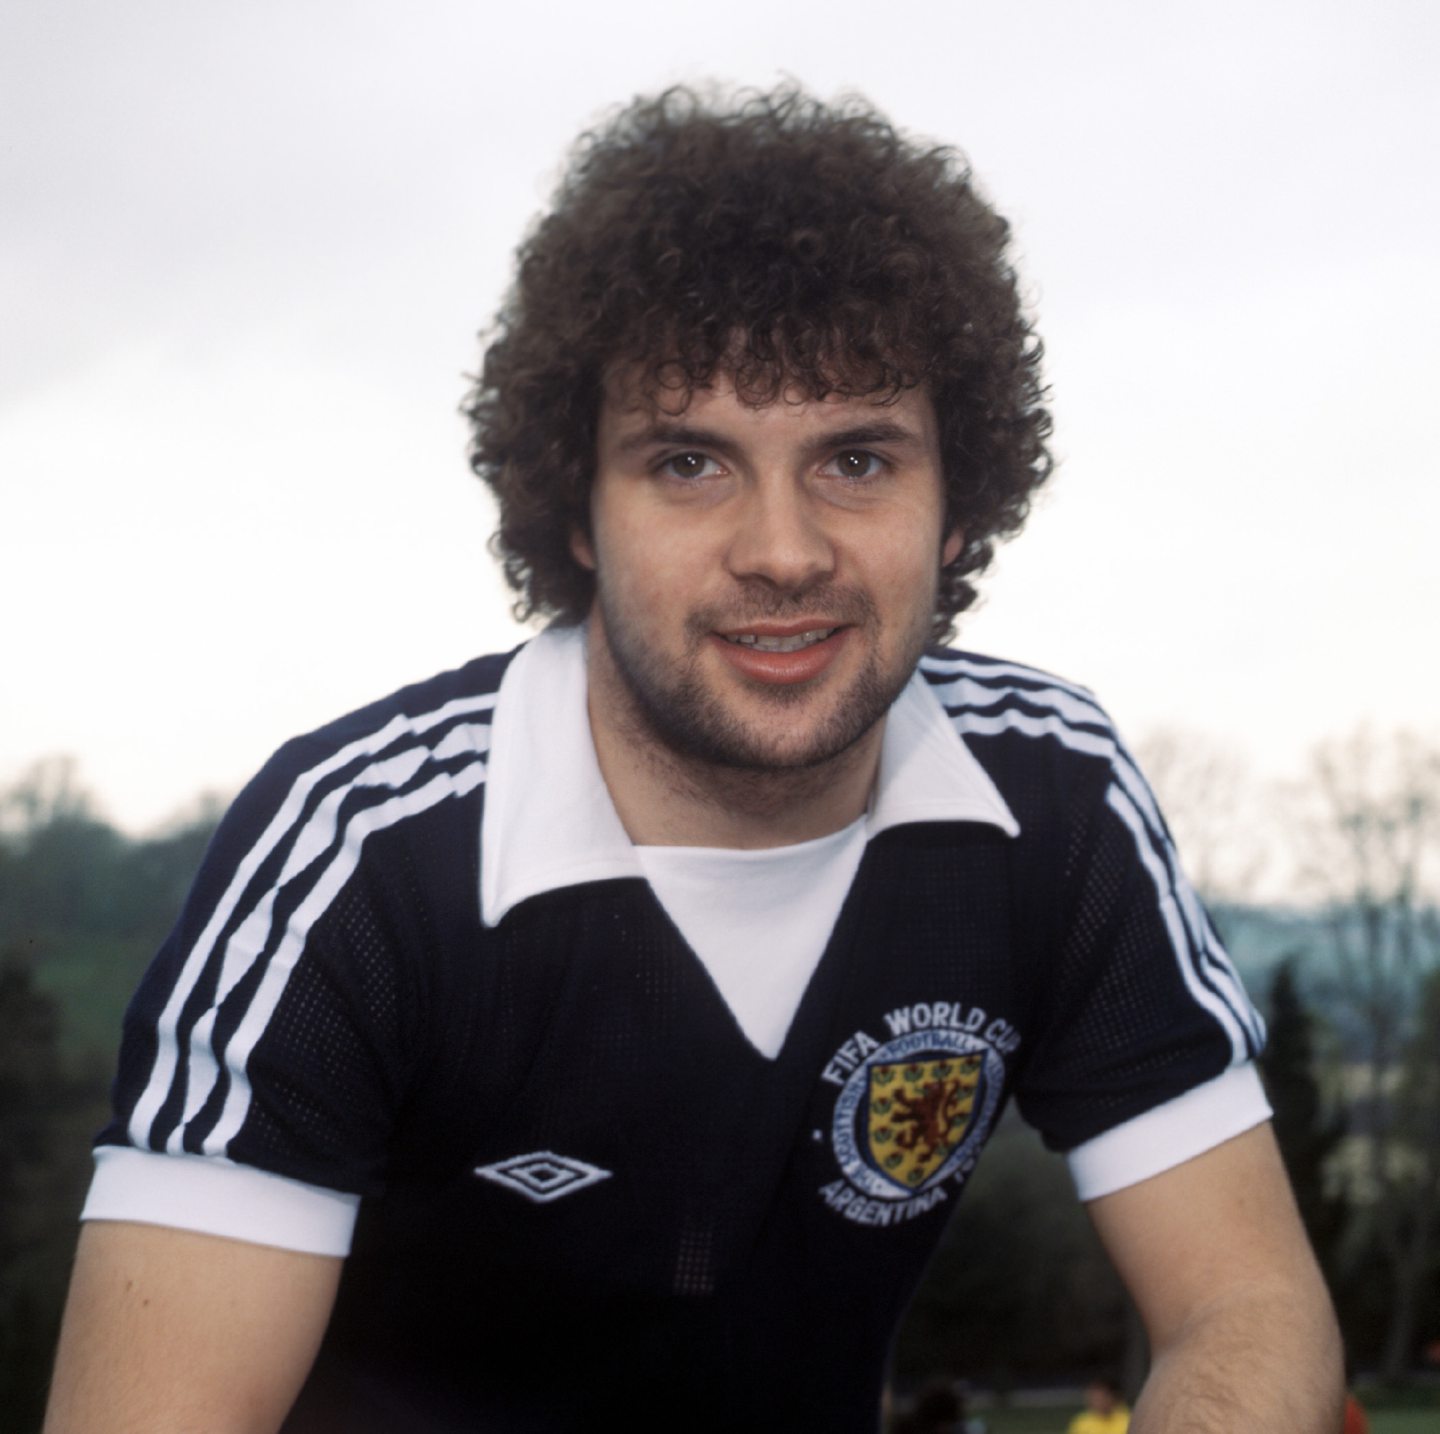 Derek Johnstone, pictured in his Scotland kit, wouldn't be selected for Scotland with MacLeod in charge. Image: SNS.